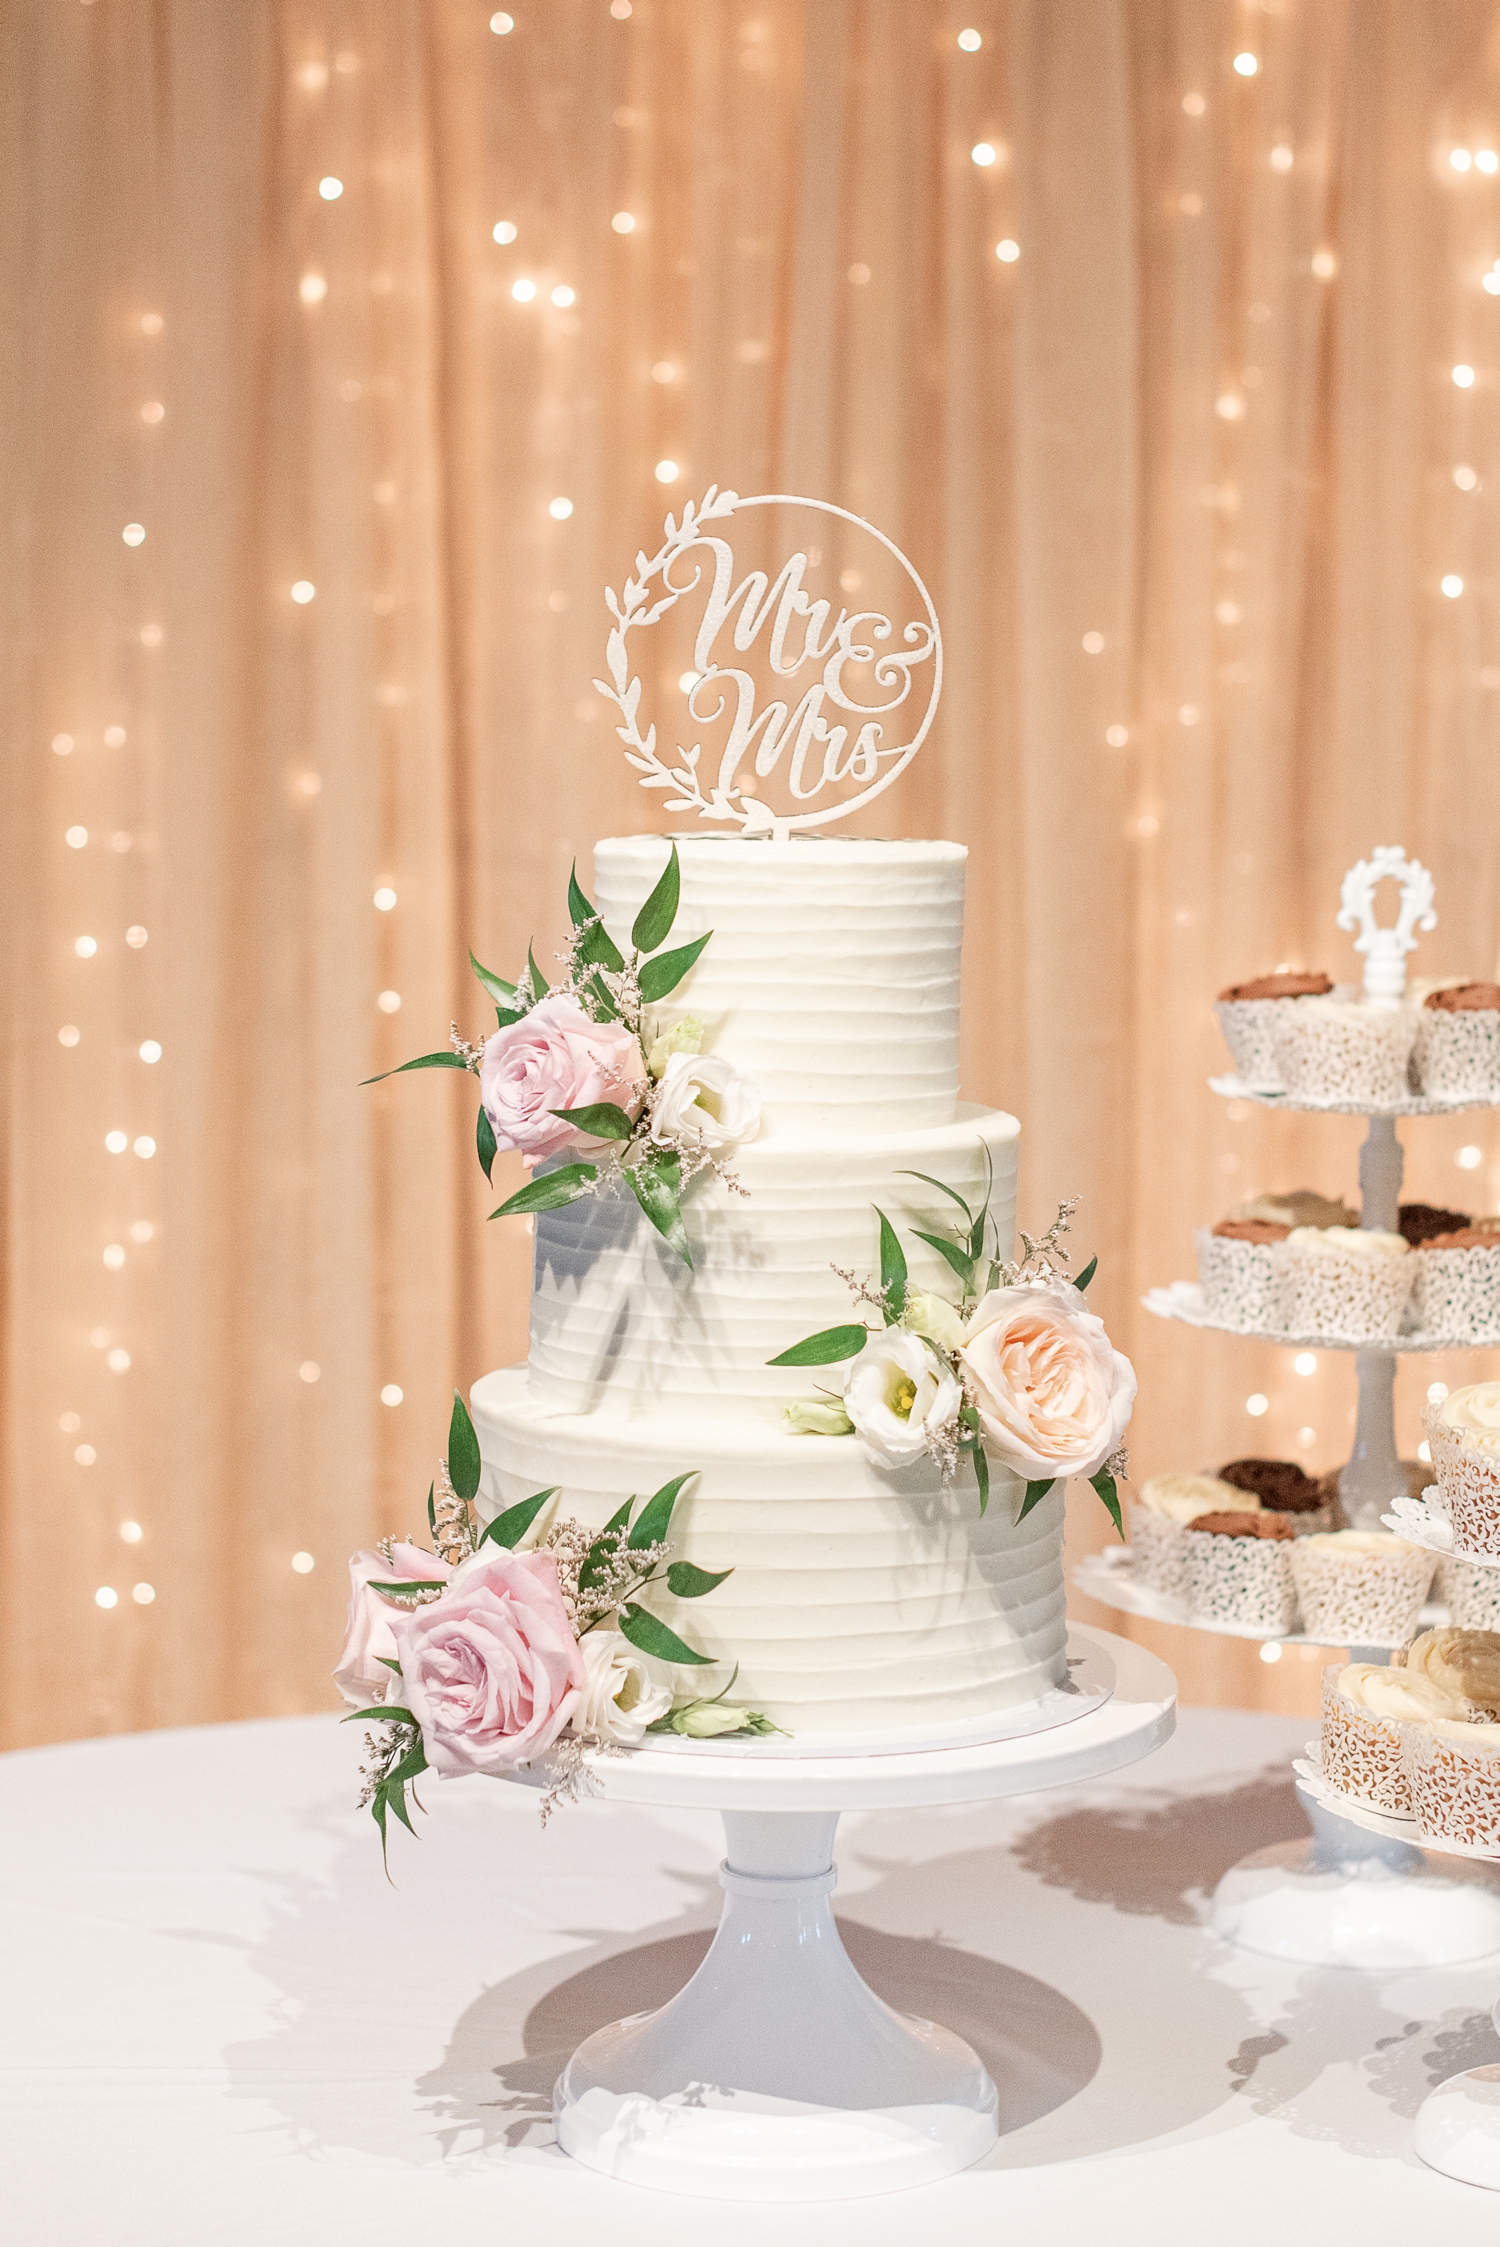 Indiana Wedding Best of Sparkler Send Off Pictures, Wedding Reception Ideas, Wedding Reception Decorations, Wedding Reception Centerpieces and Wedding Cakes by Rose Courts Photography